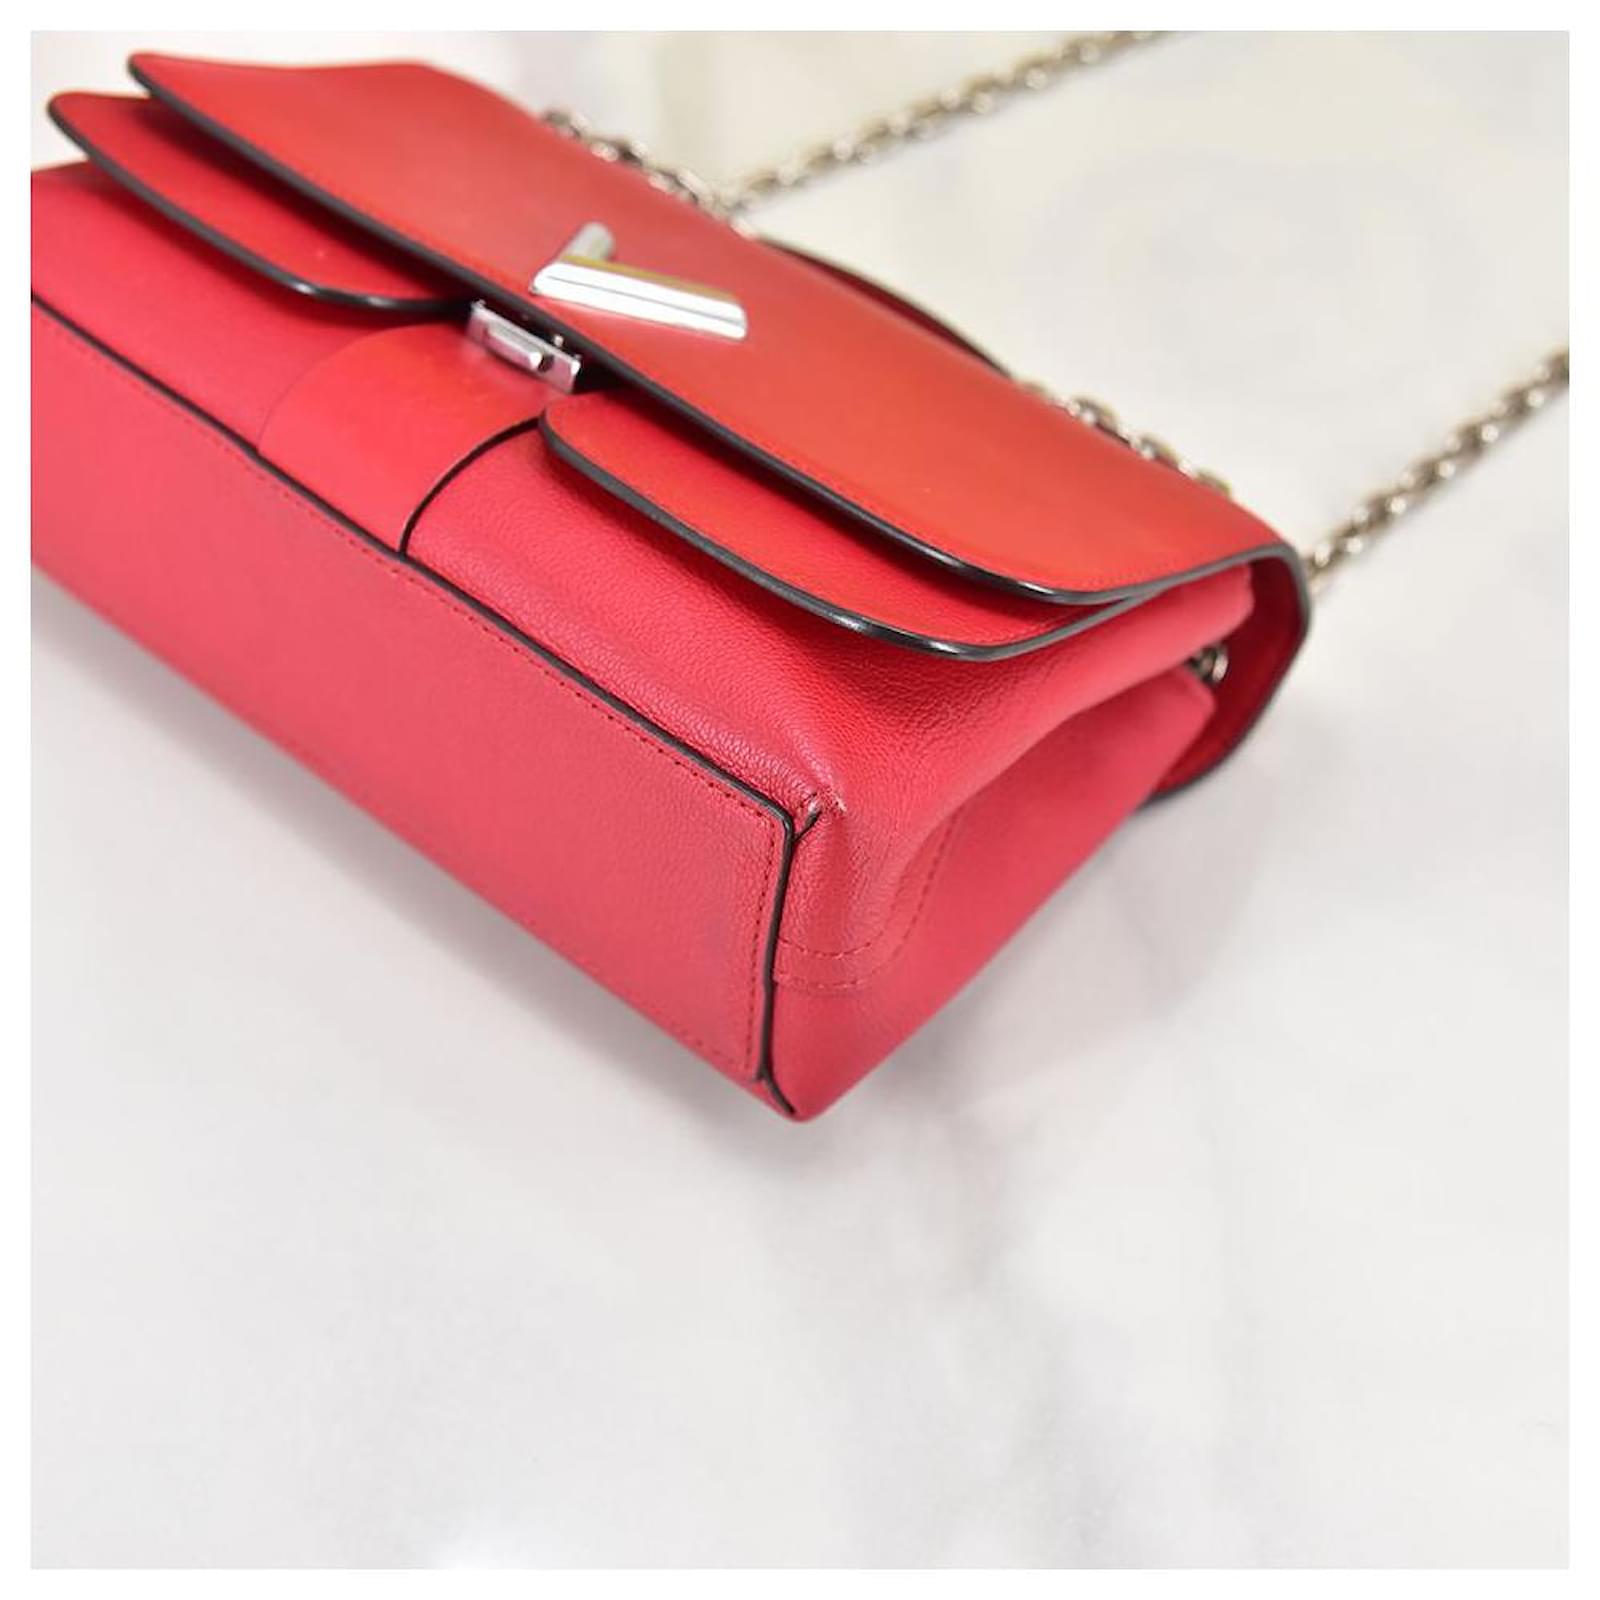 Louis Vuitton Very Chain Bag, Red, One Size